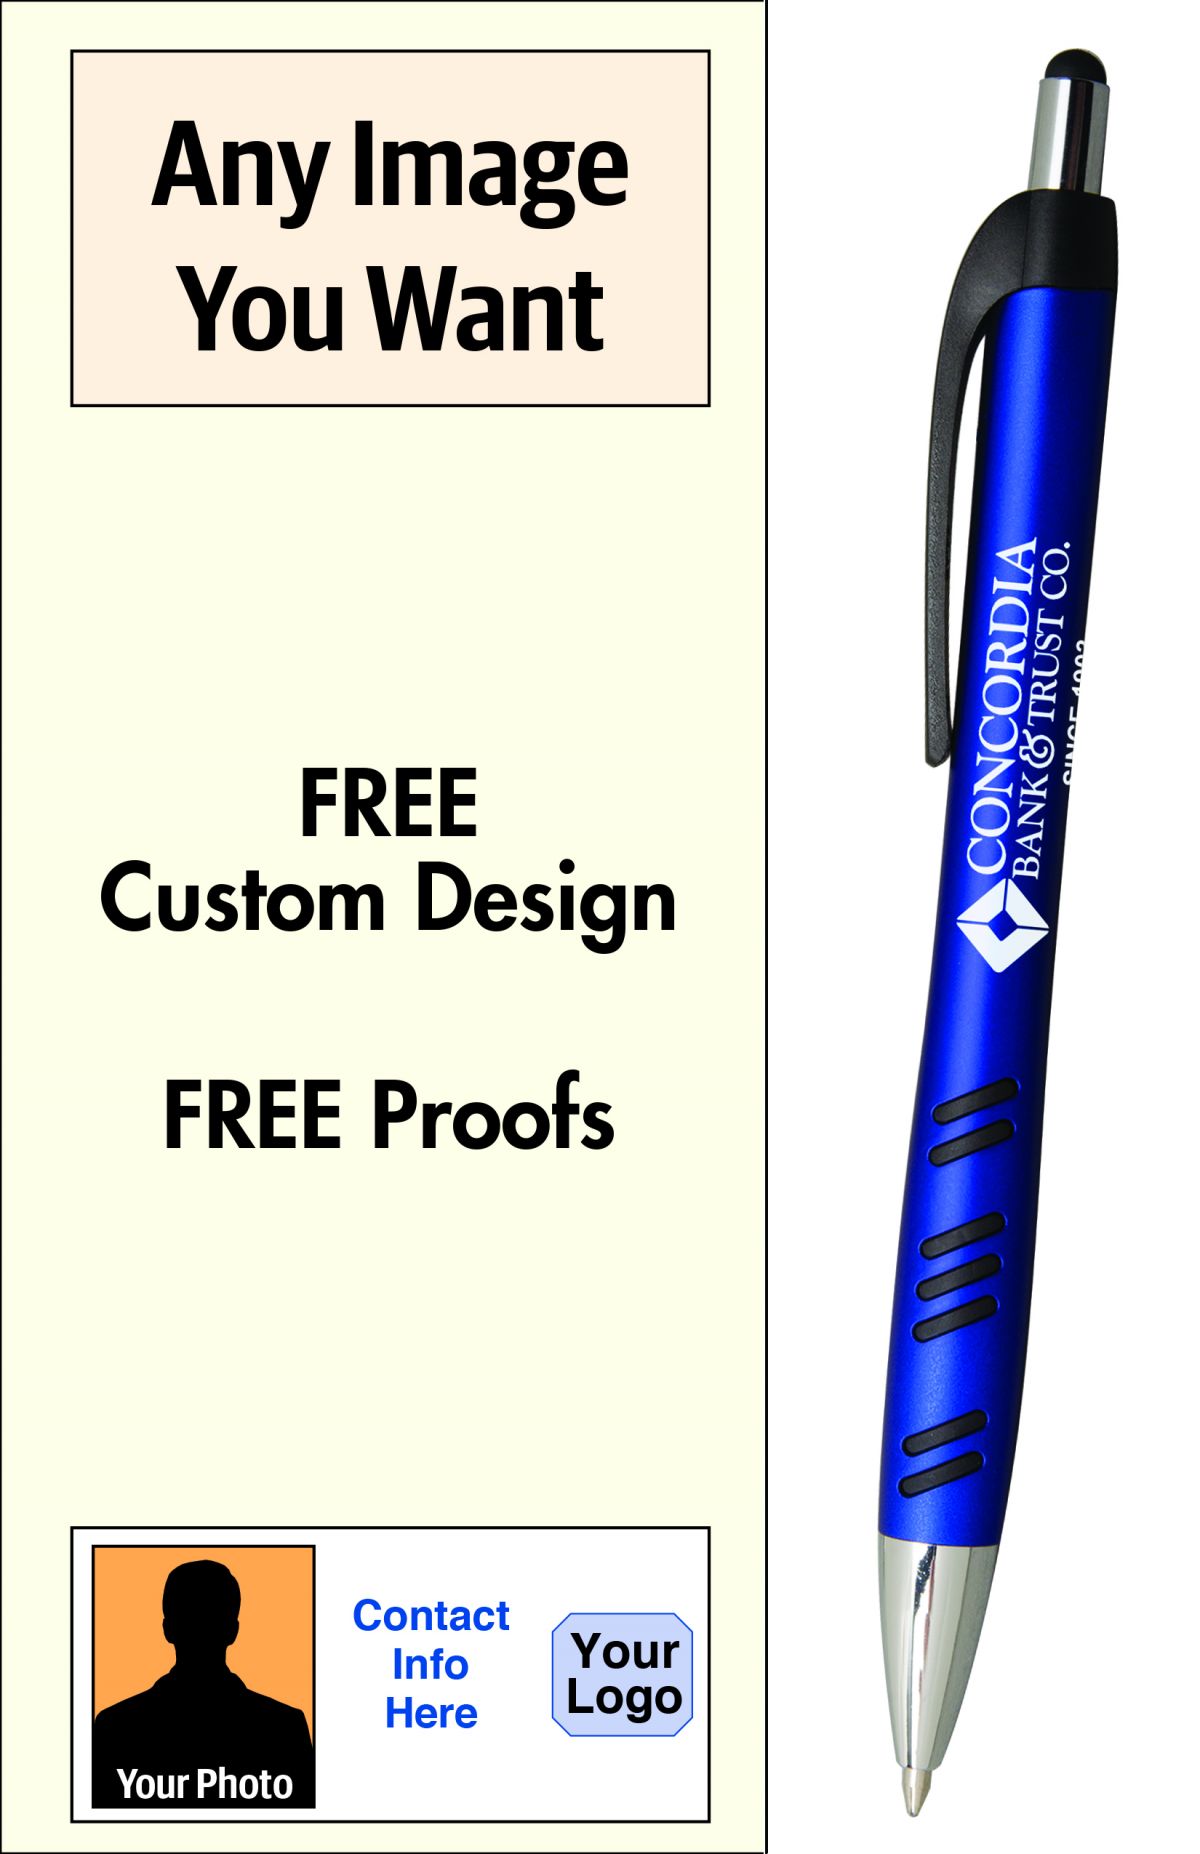 ReaMark Products: Promotional/Pens